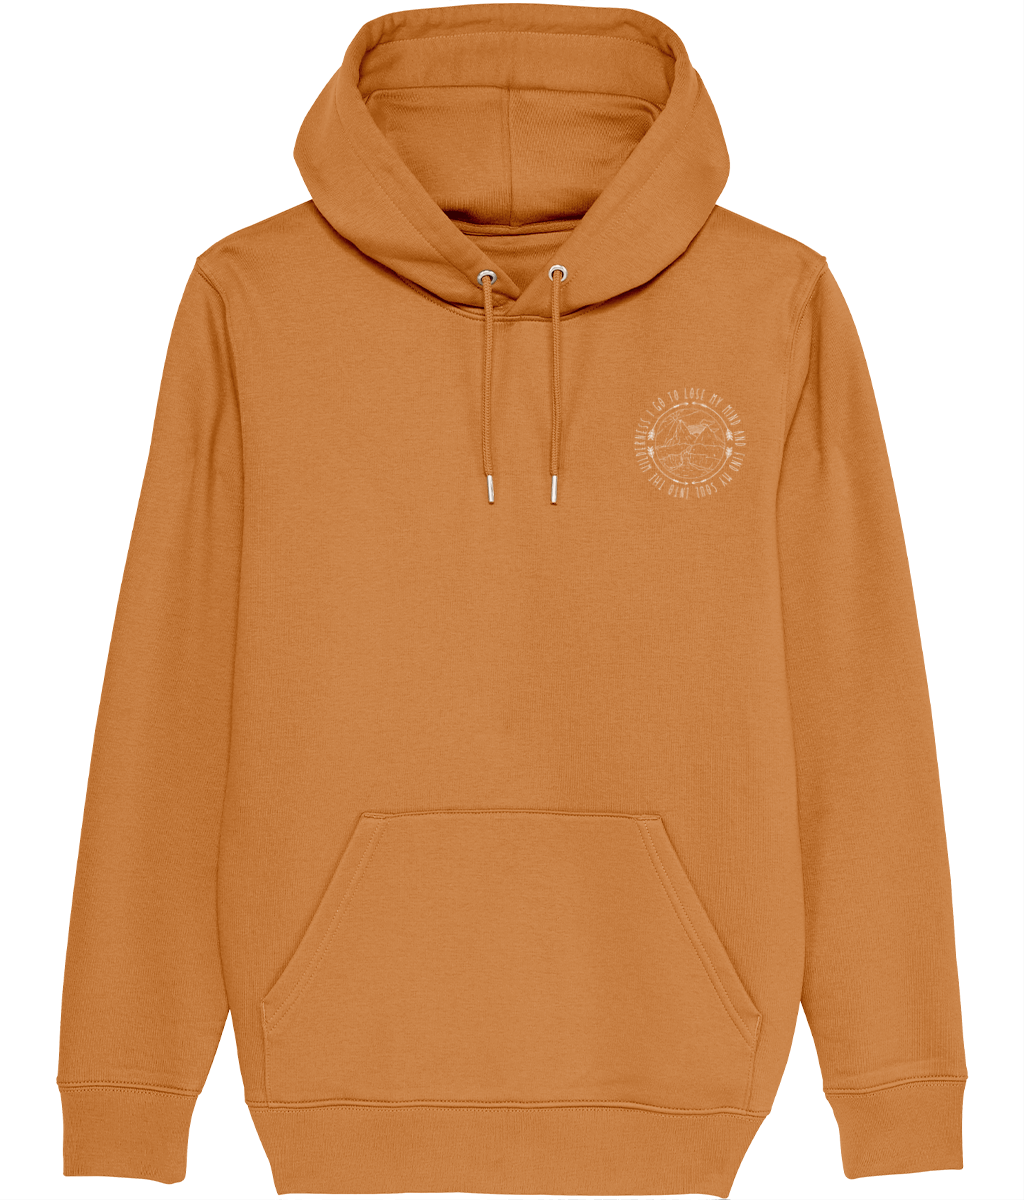 Into The Wilderness Organic Cotton Hoodie